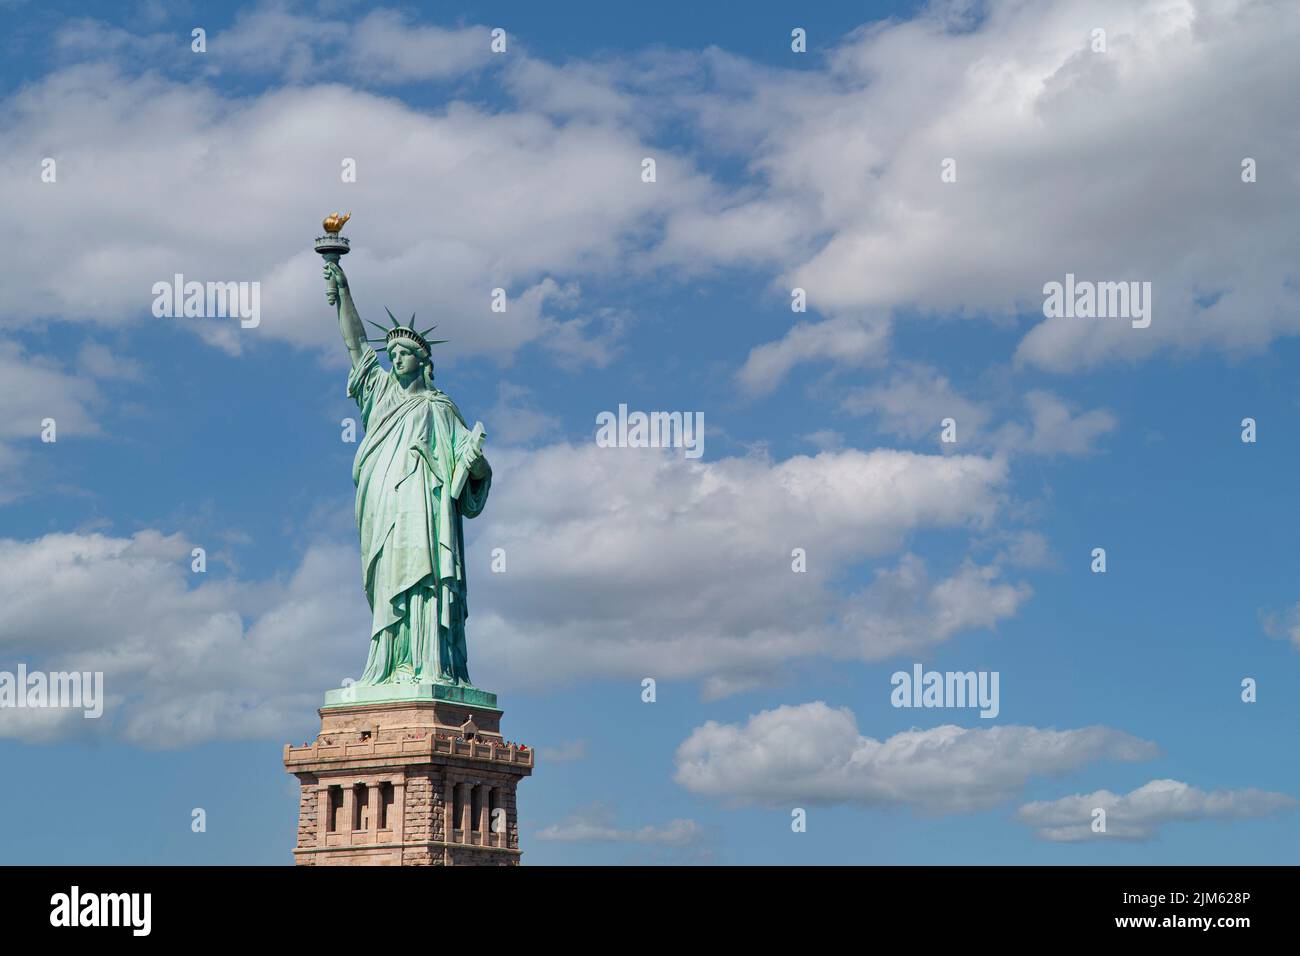 The Statue of Liberty rises out of Liberty Island in the waters that surround the city of New York. Stock Photo